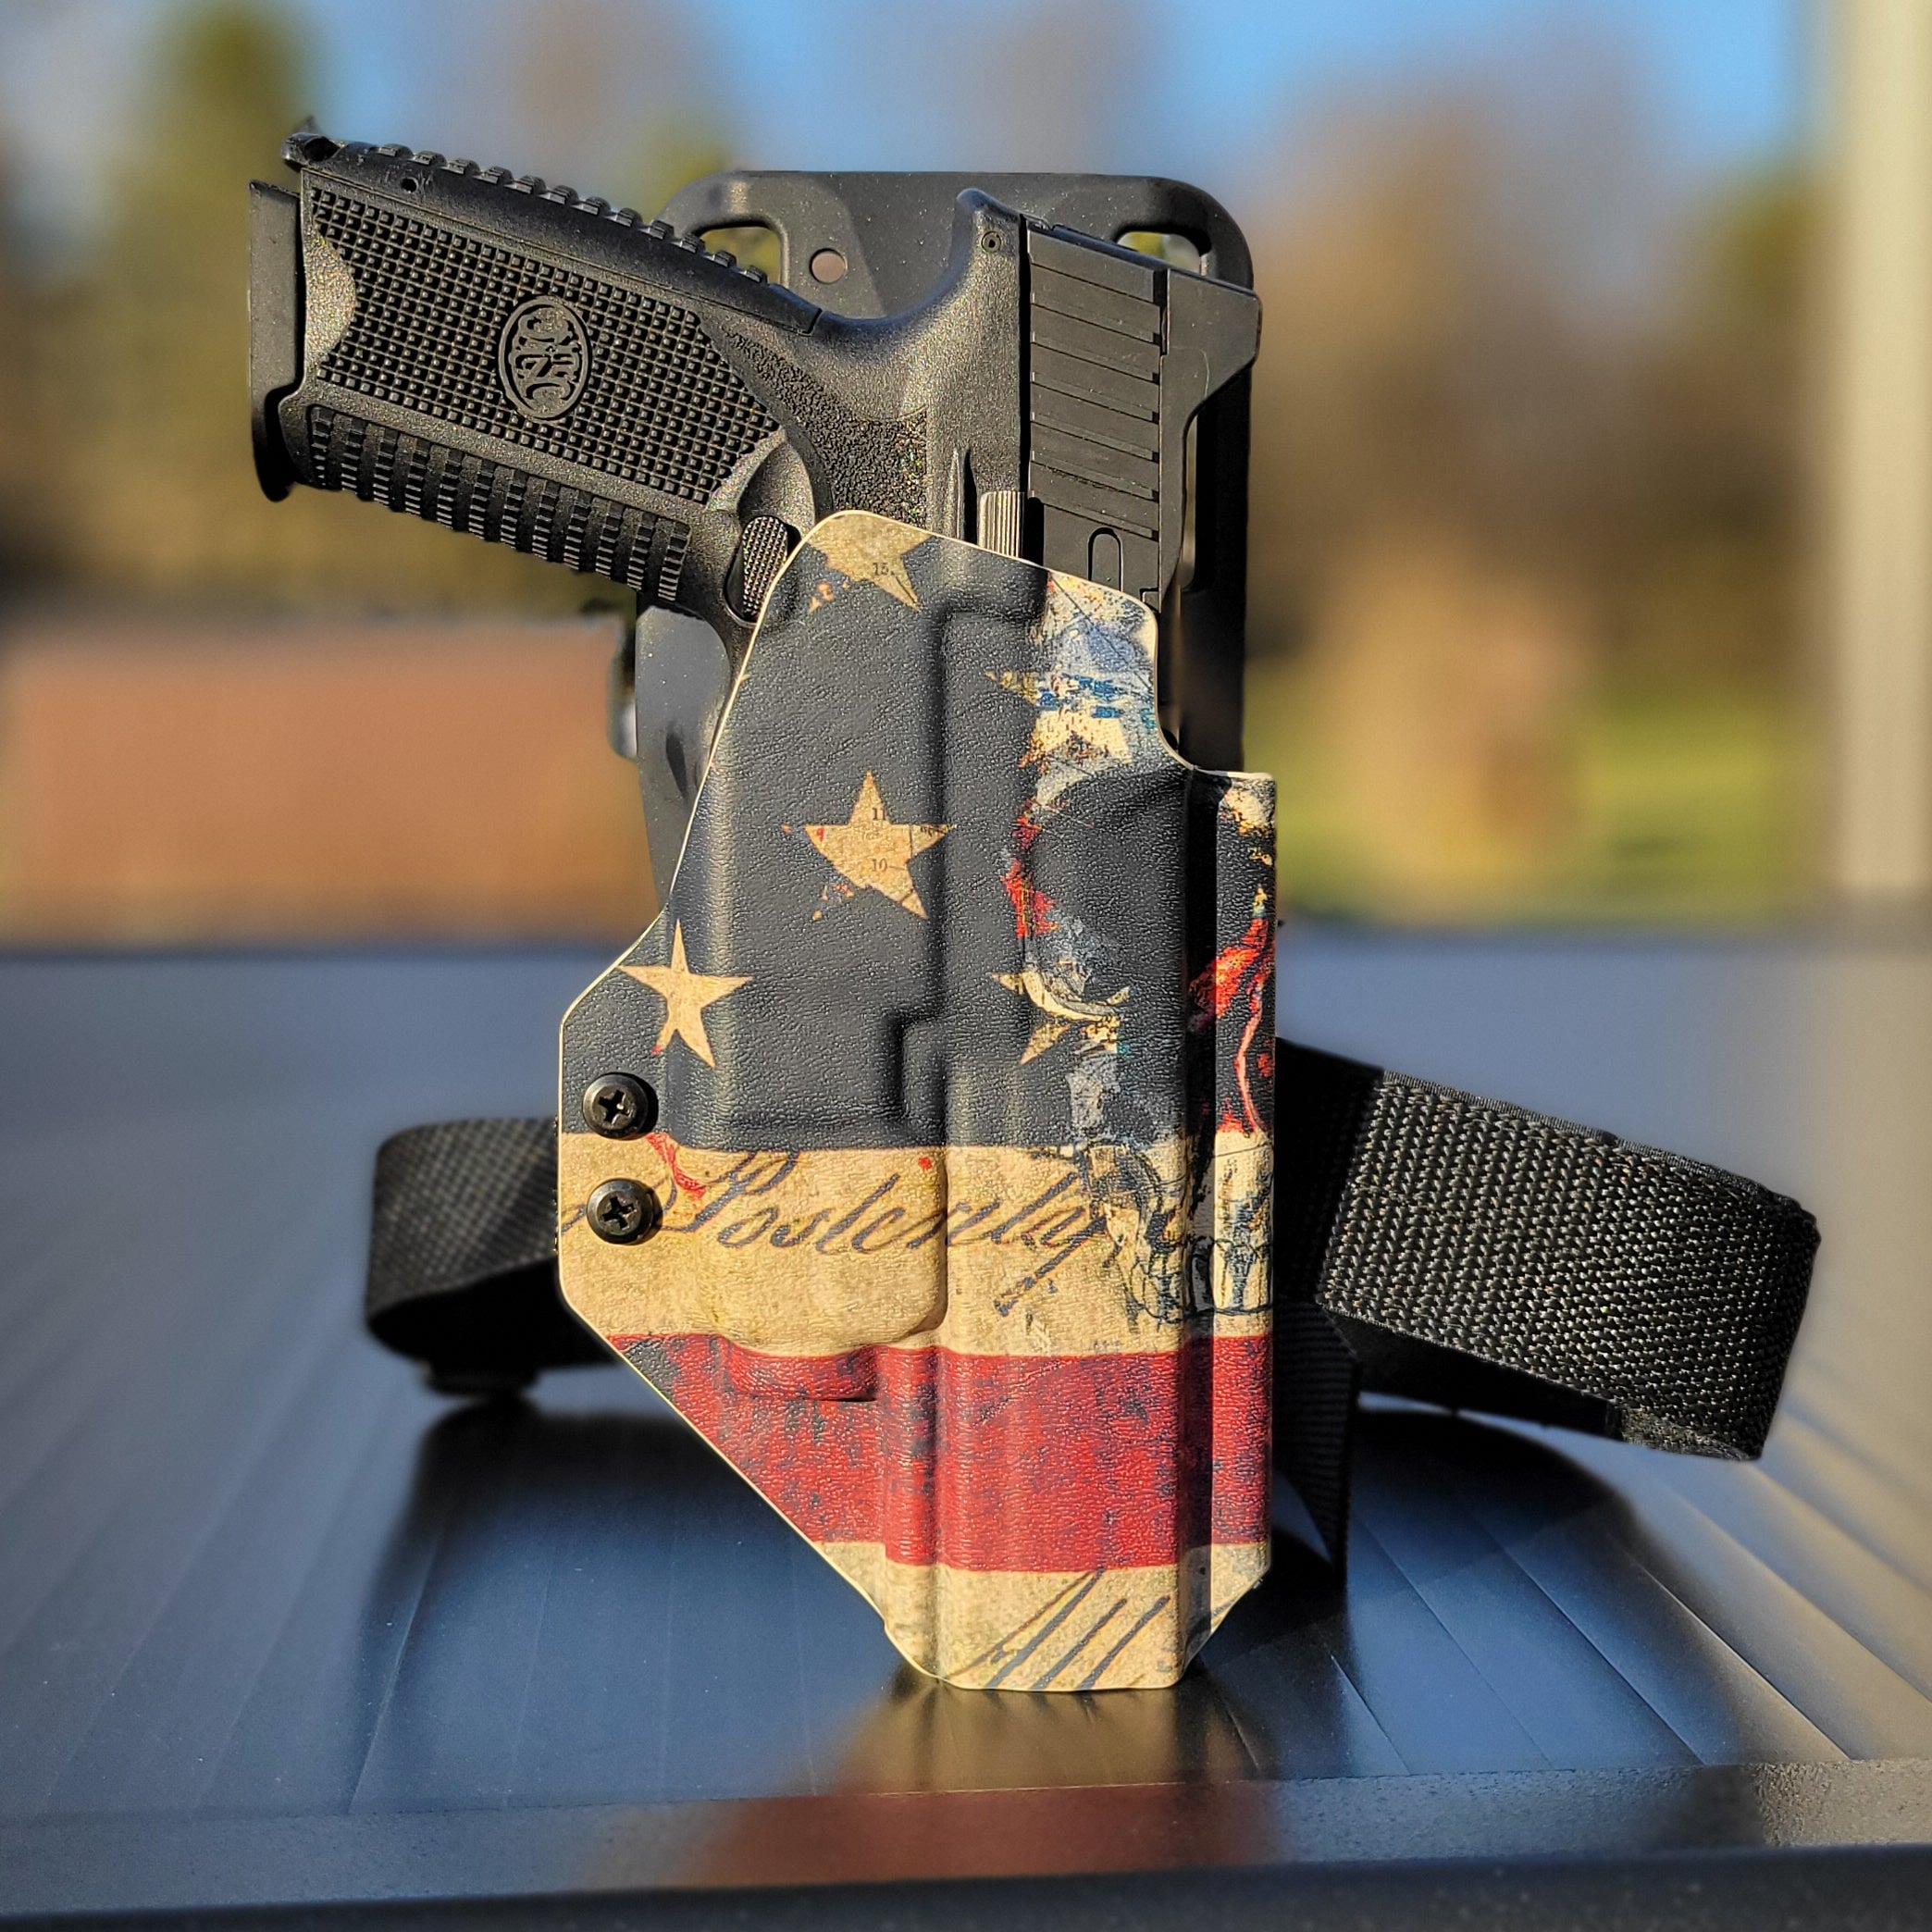 Our Outside Waistband Kydex Duty and Competition Holster is designed to fit the FN 509 LS Edge with the Streamlight TLR-8 or TLR-8A on the pistol. It will fit the Apex Tactical 5.00" Slide and 509 509 Tactical with the TRL-1 attached. Open muzzle Full sweat guard, adjustable retention, cleared for red dot. Made in USA